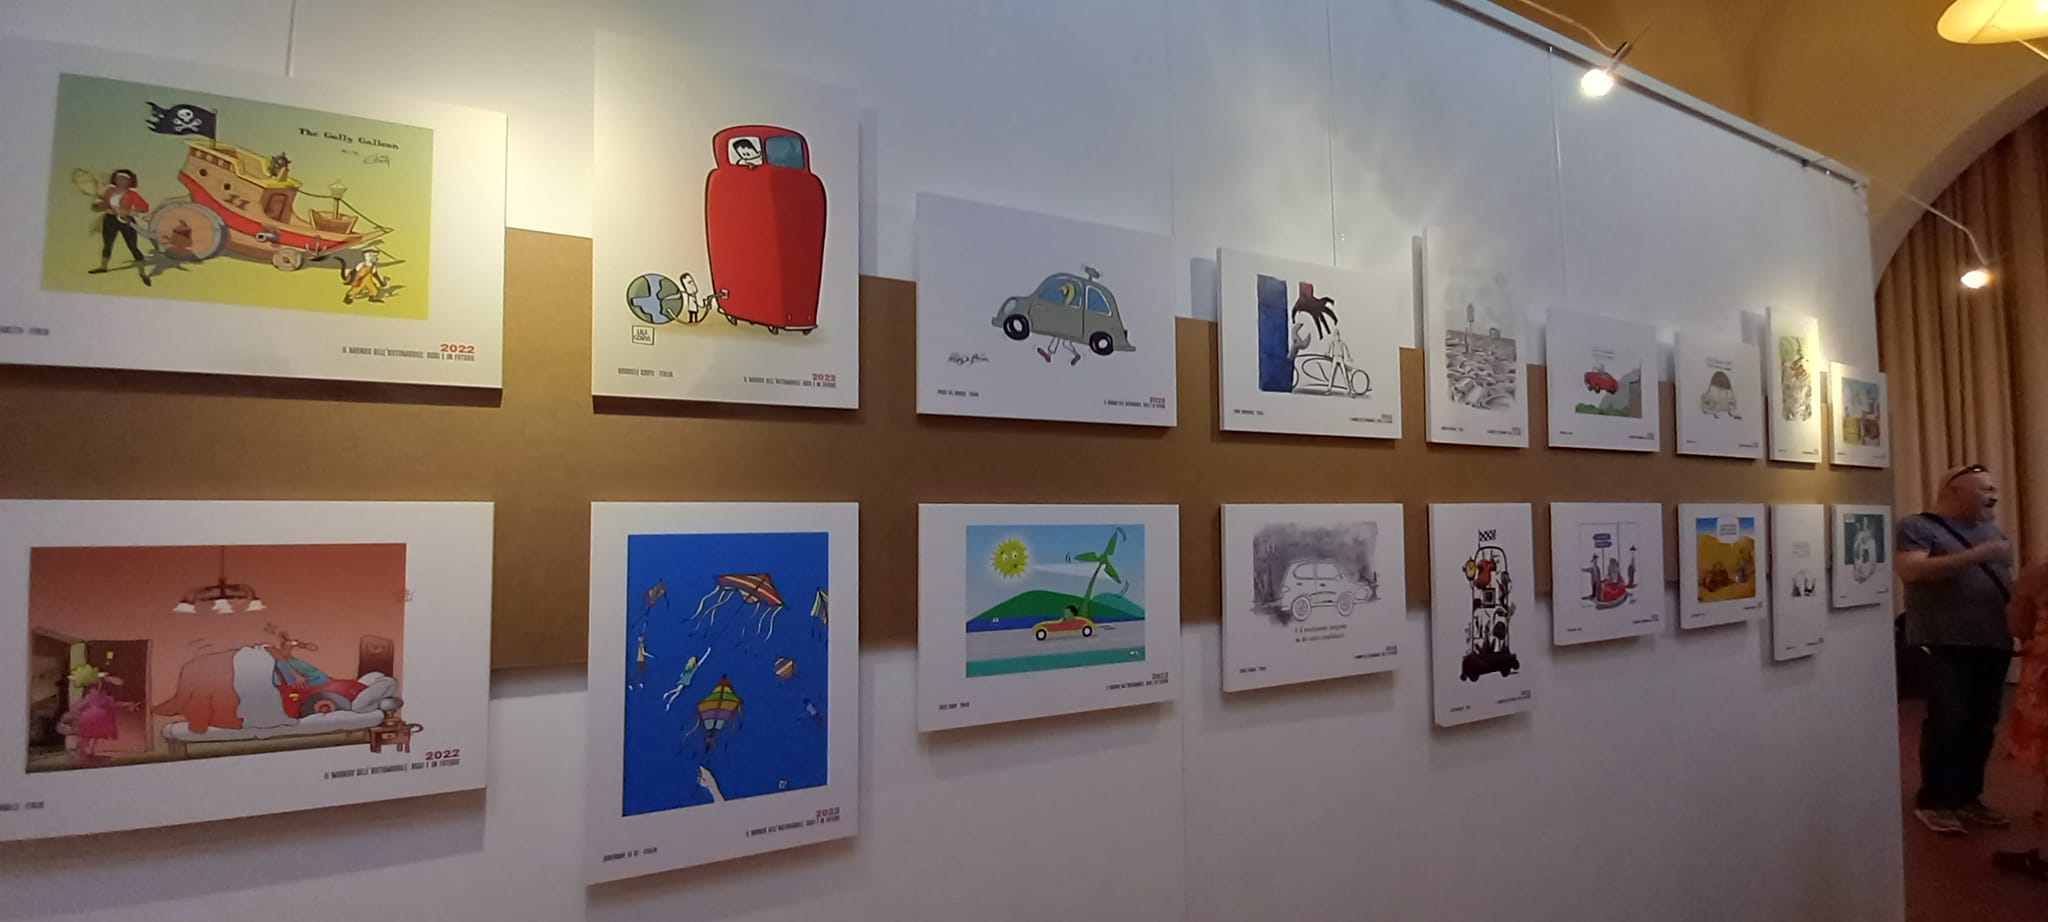 Photos from Inauguration of the International Exhibition of Humor in Italy